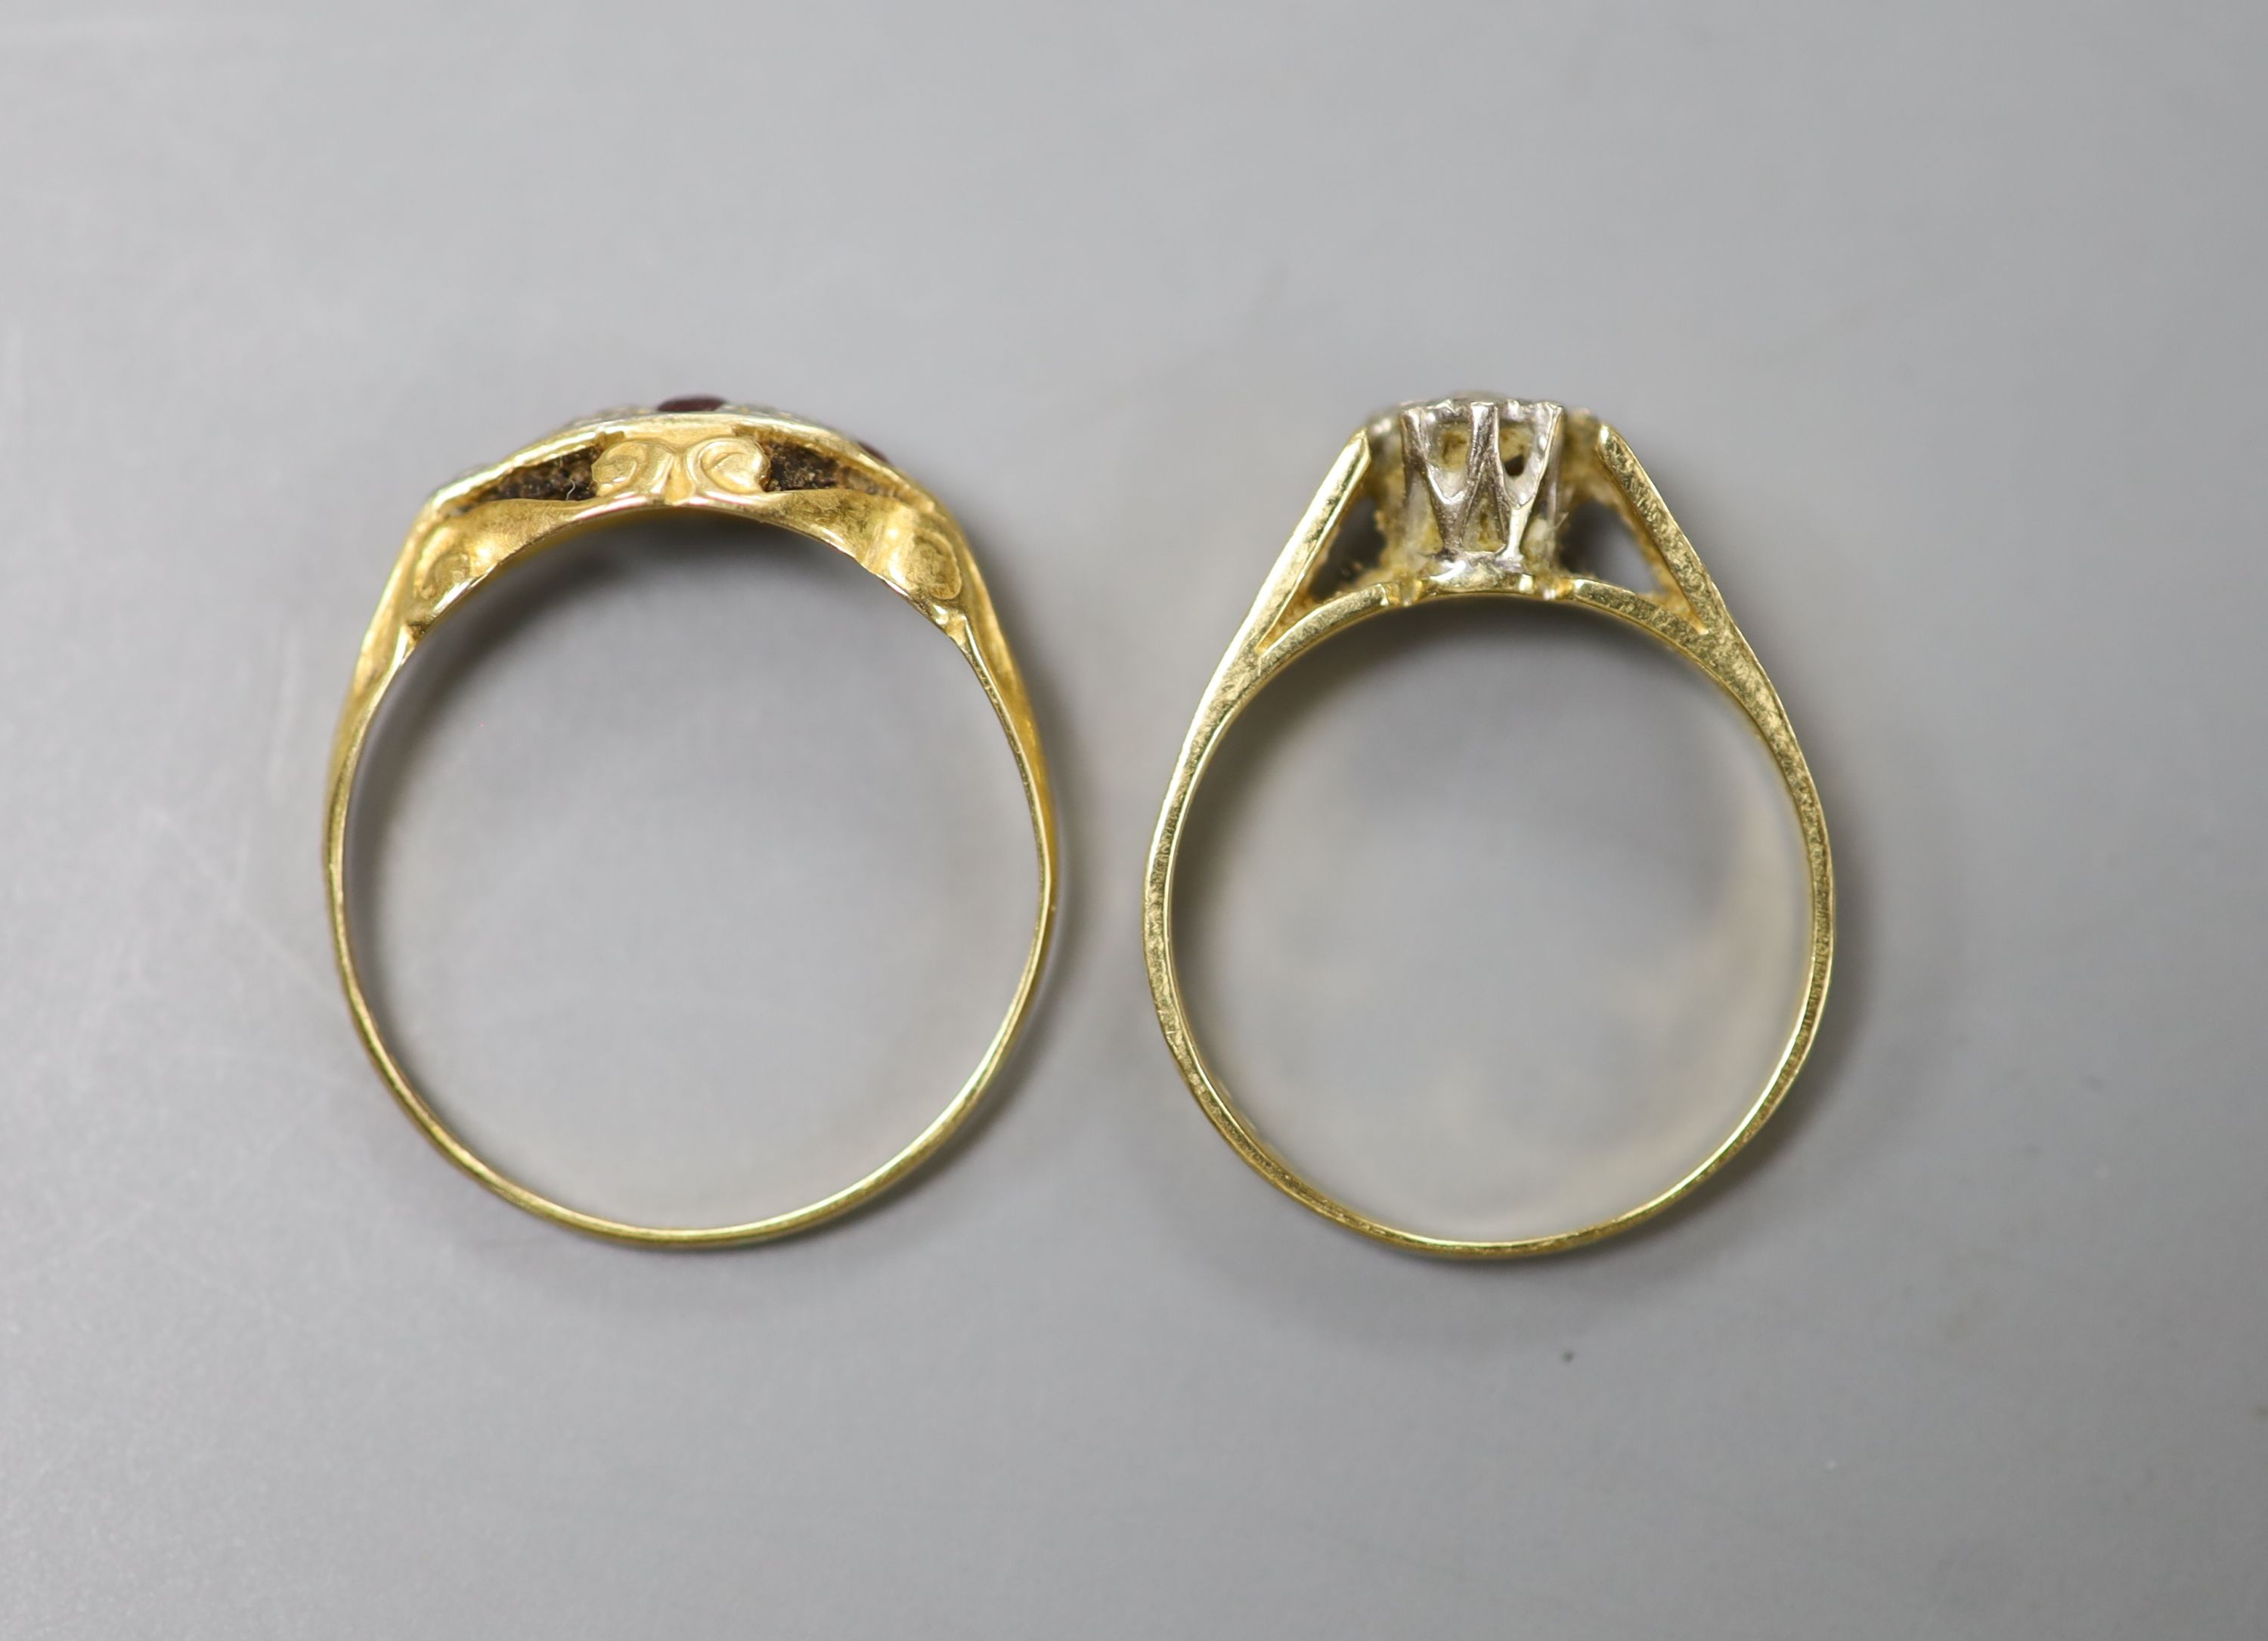 A modern 18ct gold and illusion set diamond ring and one other 18ct and gem set ring, gross weight 4.1 grams.